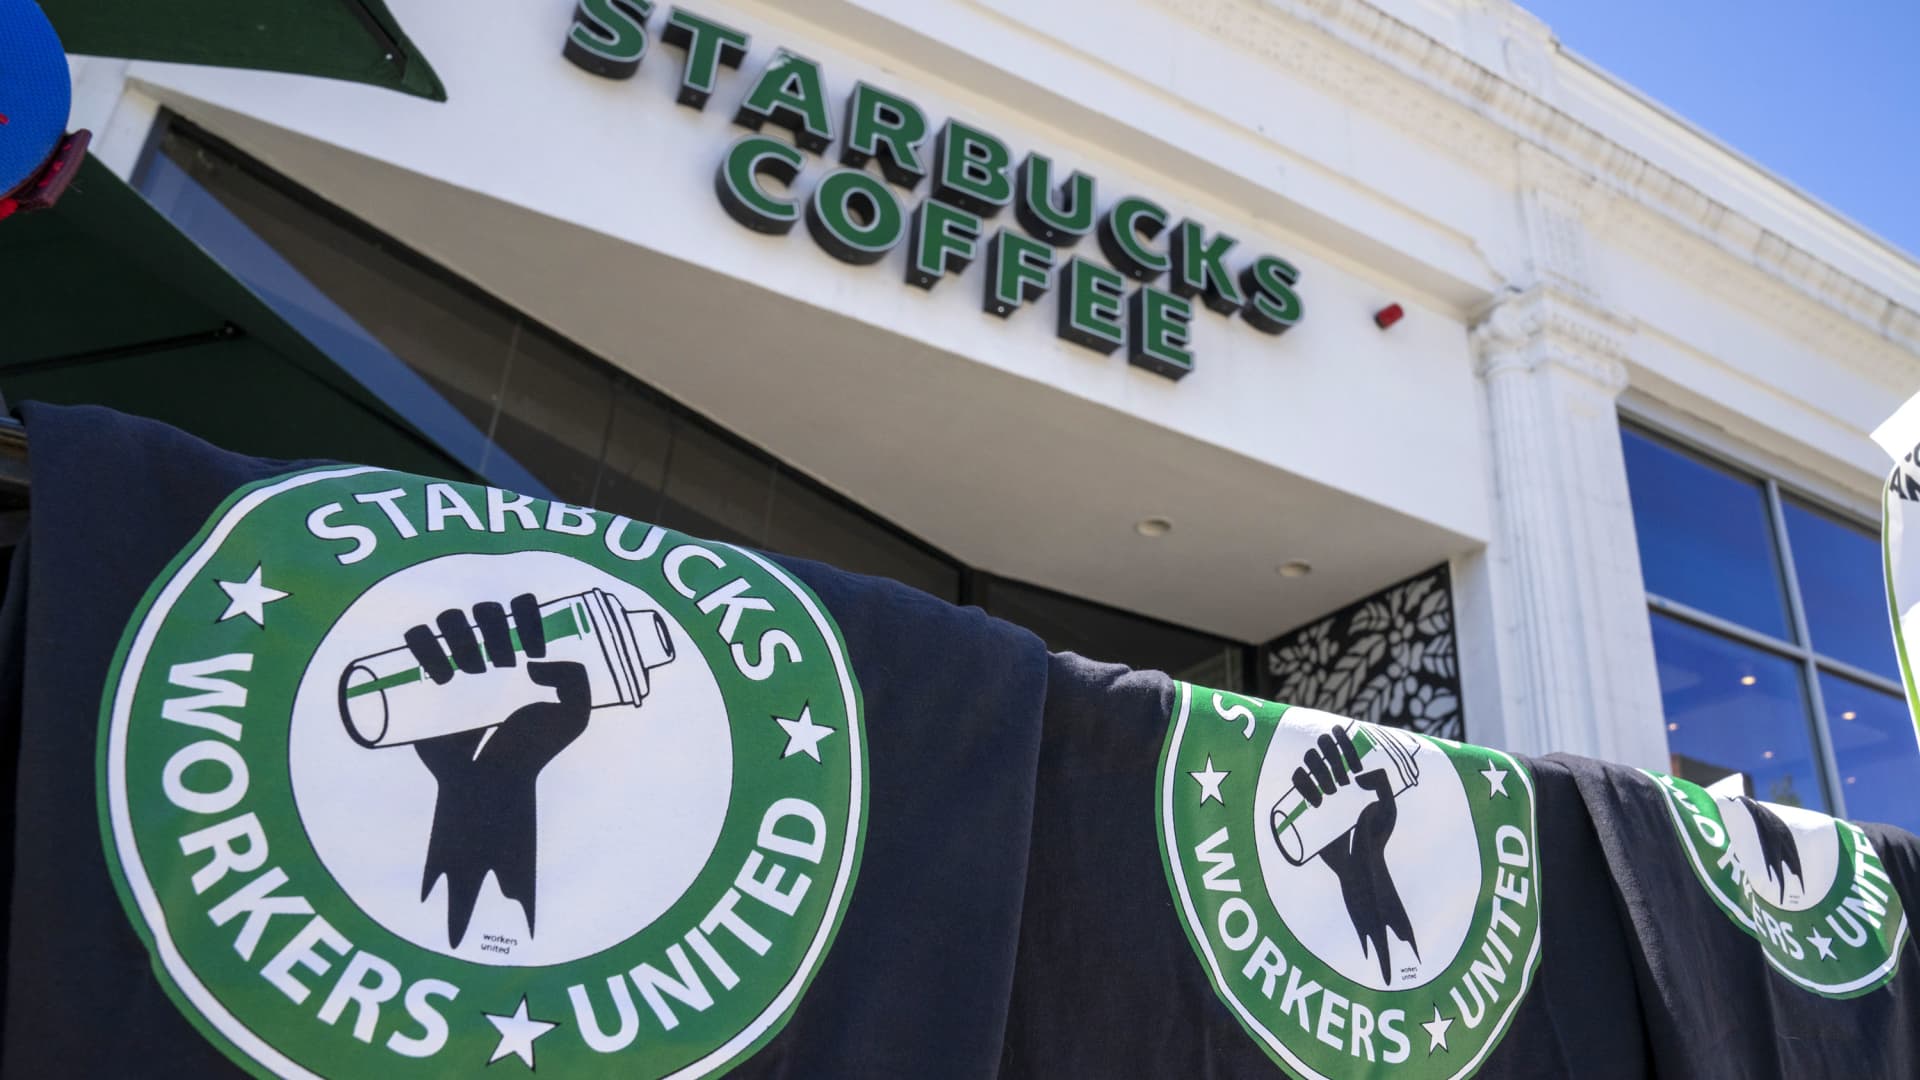 Starbucks union asks espresso wide to delay pay hikes, benefits to unionized stores